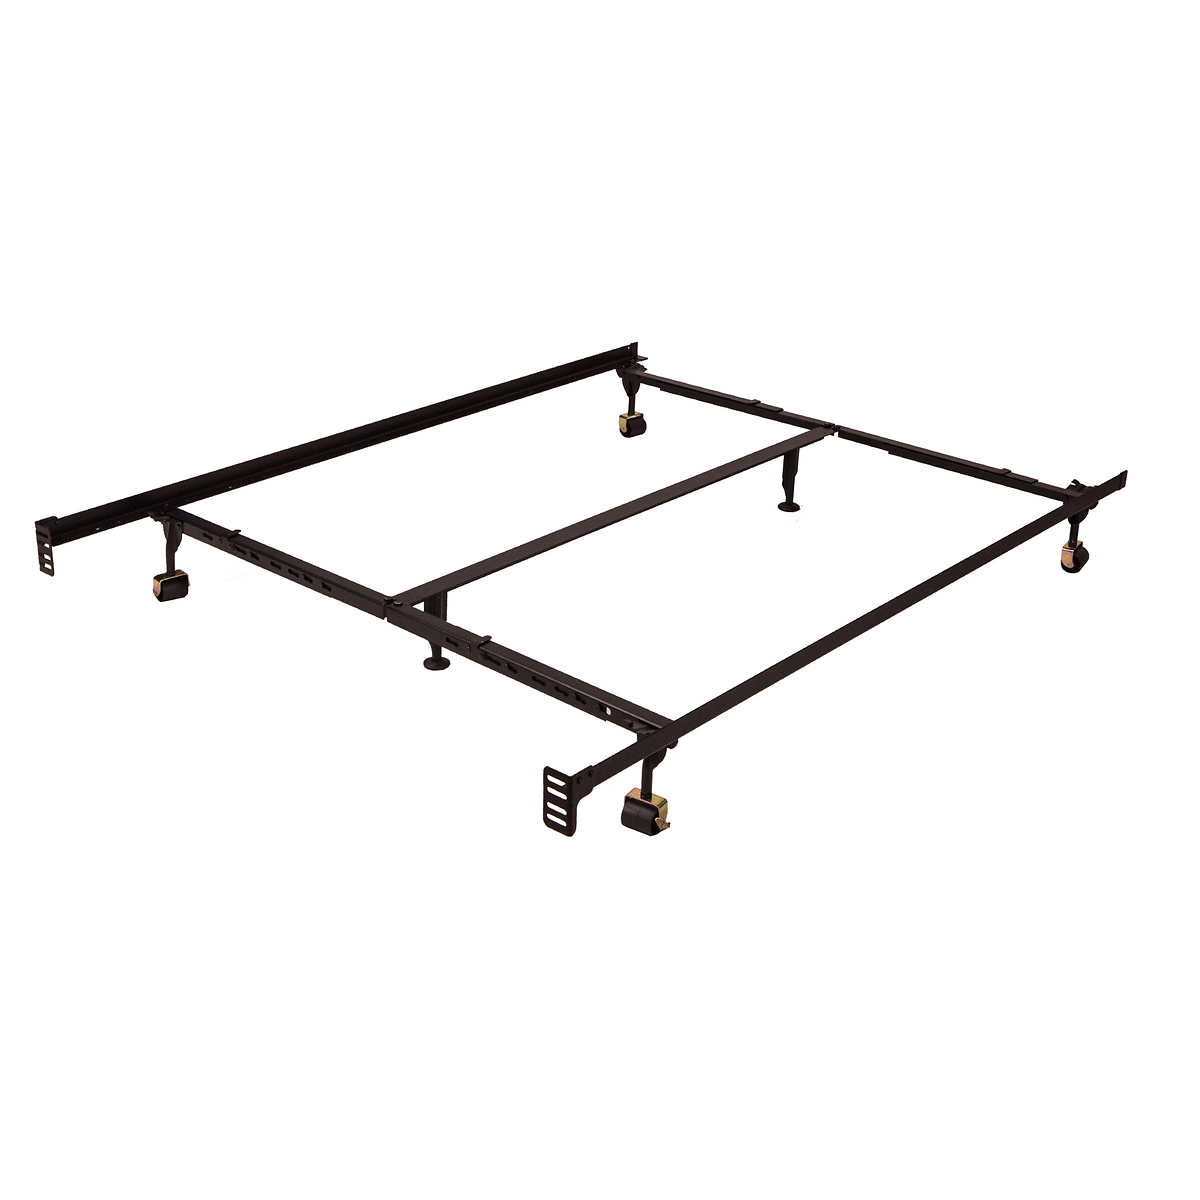 Premium Universal Lev R Lock Bed Frame, How To Put Together A Bed Frame King